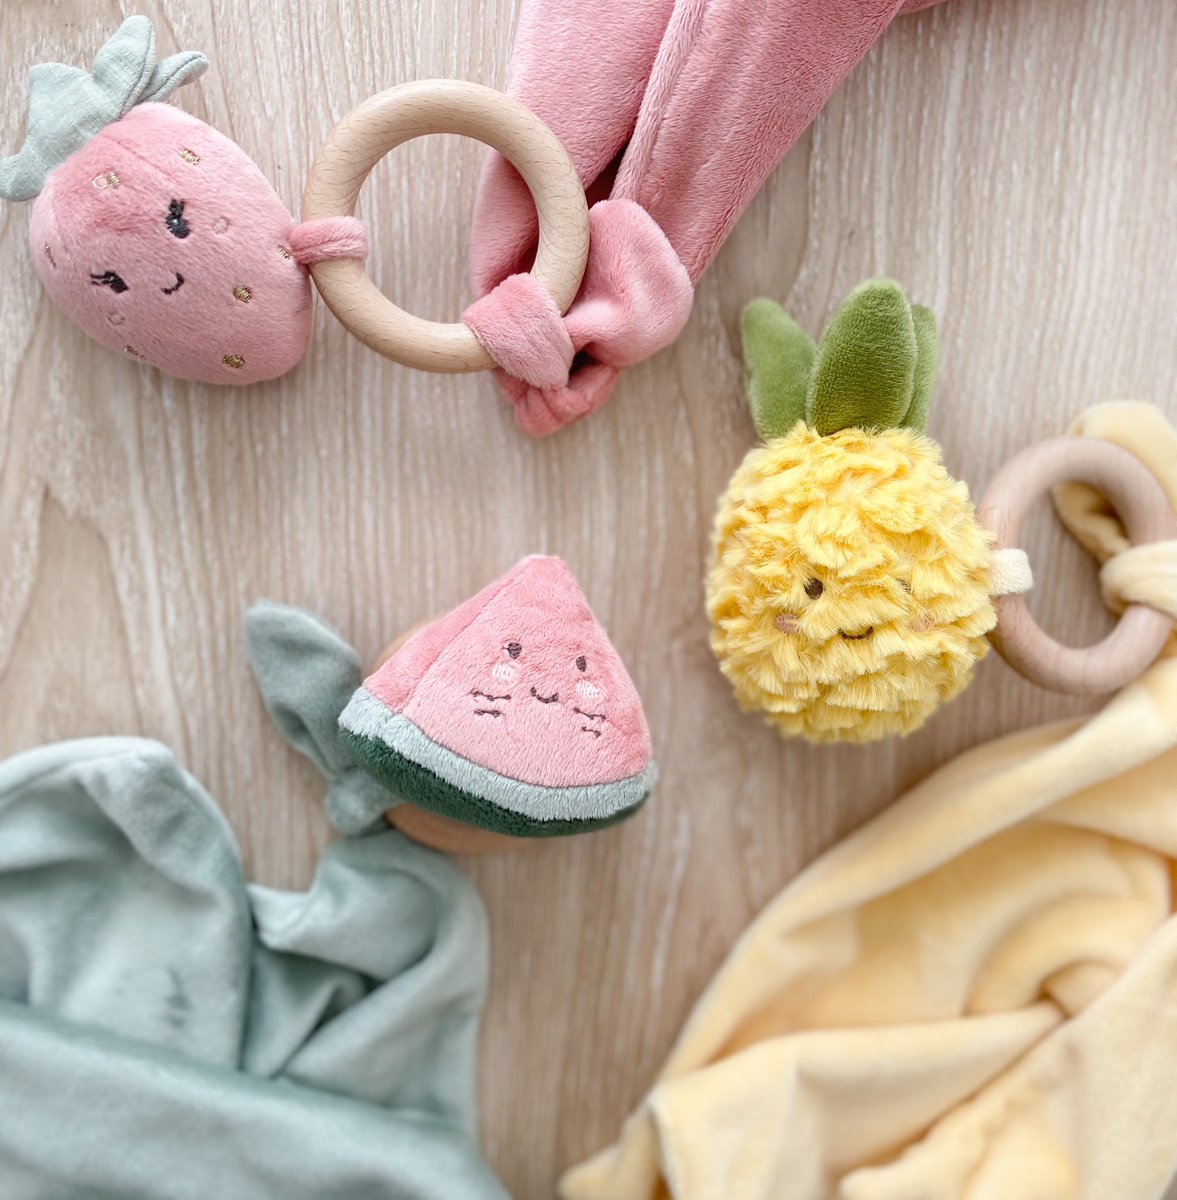 Summer fruits teethers, fun and function all in one! 🍓🍉🍍 #lovemonami #securityblanket #teethers #tuttifrutti